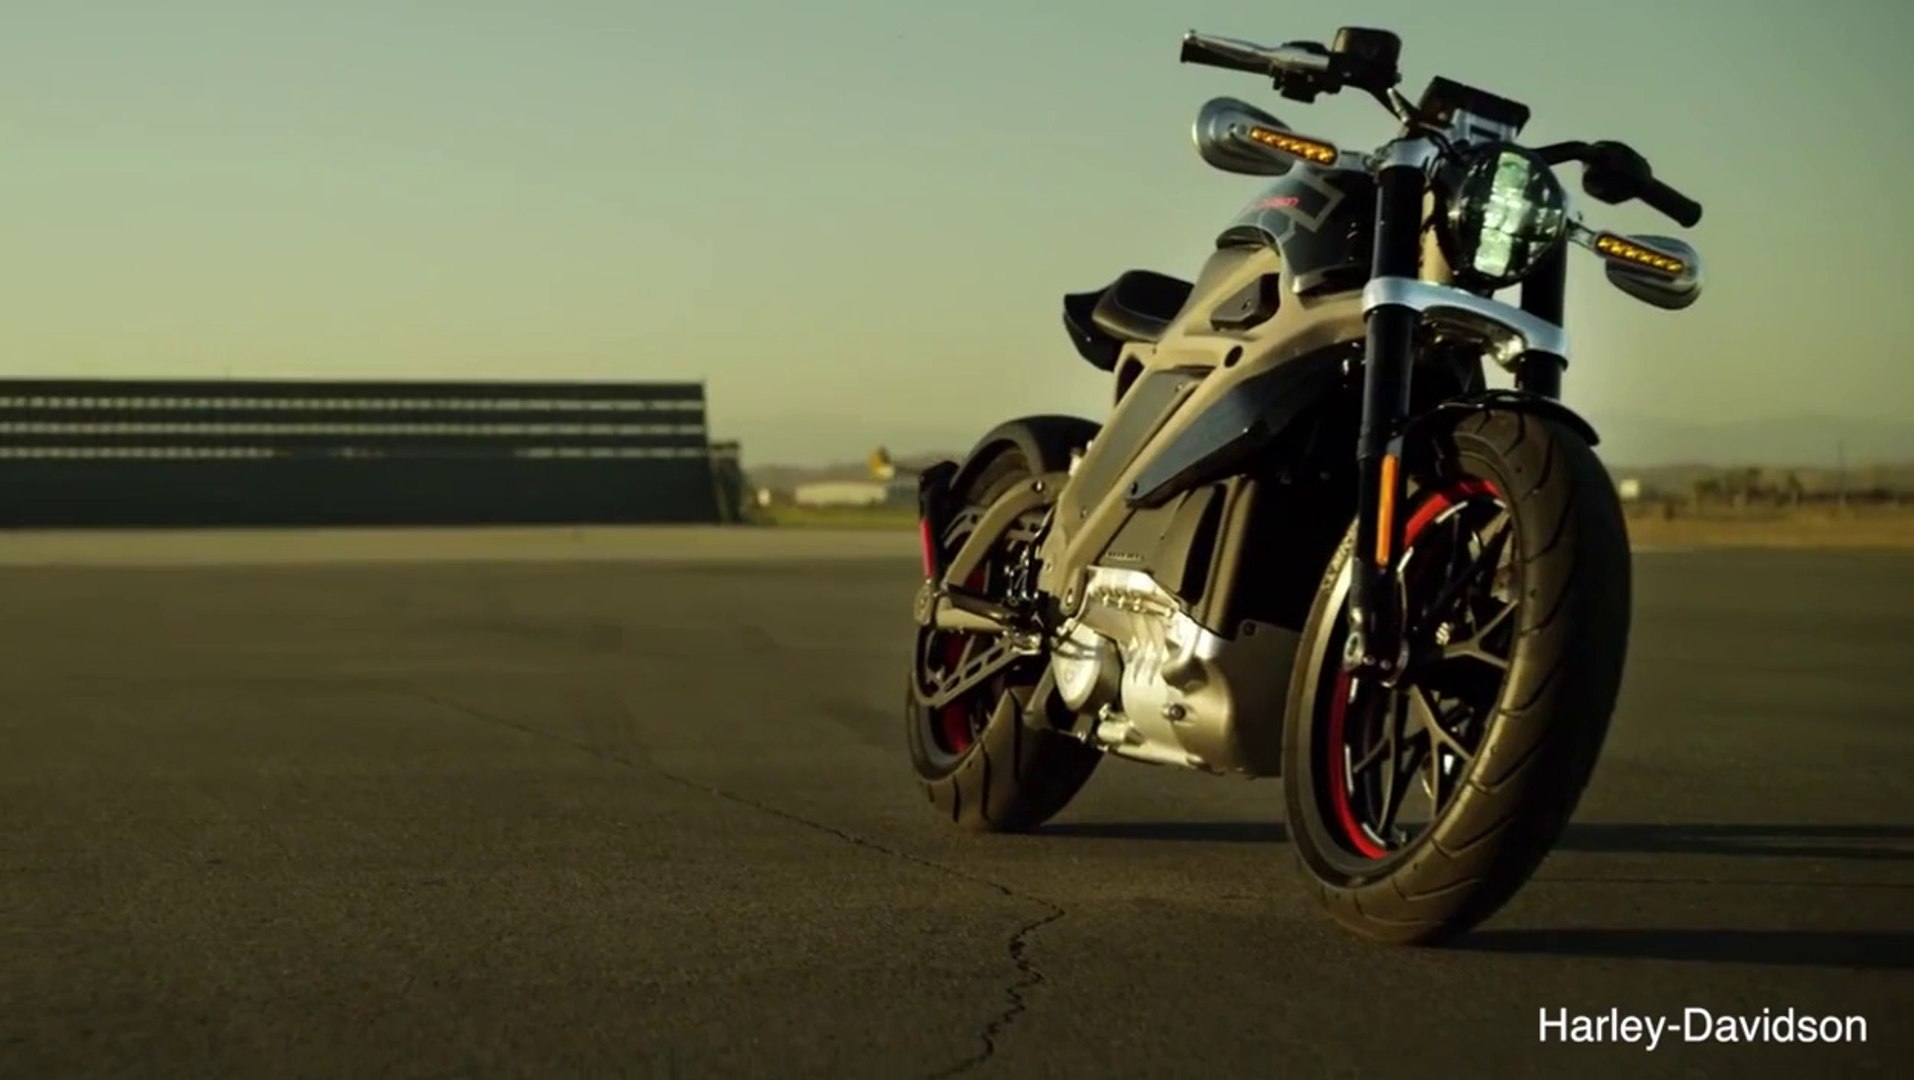 Harley Davidson Makes Its First Electric Motorcycle